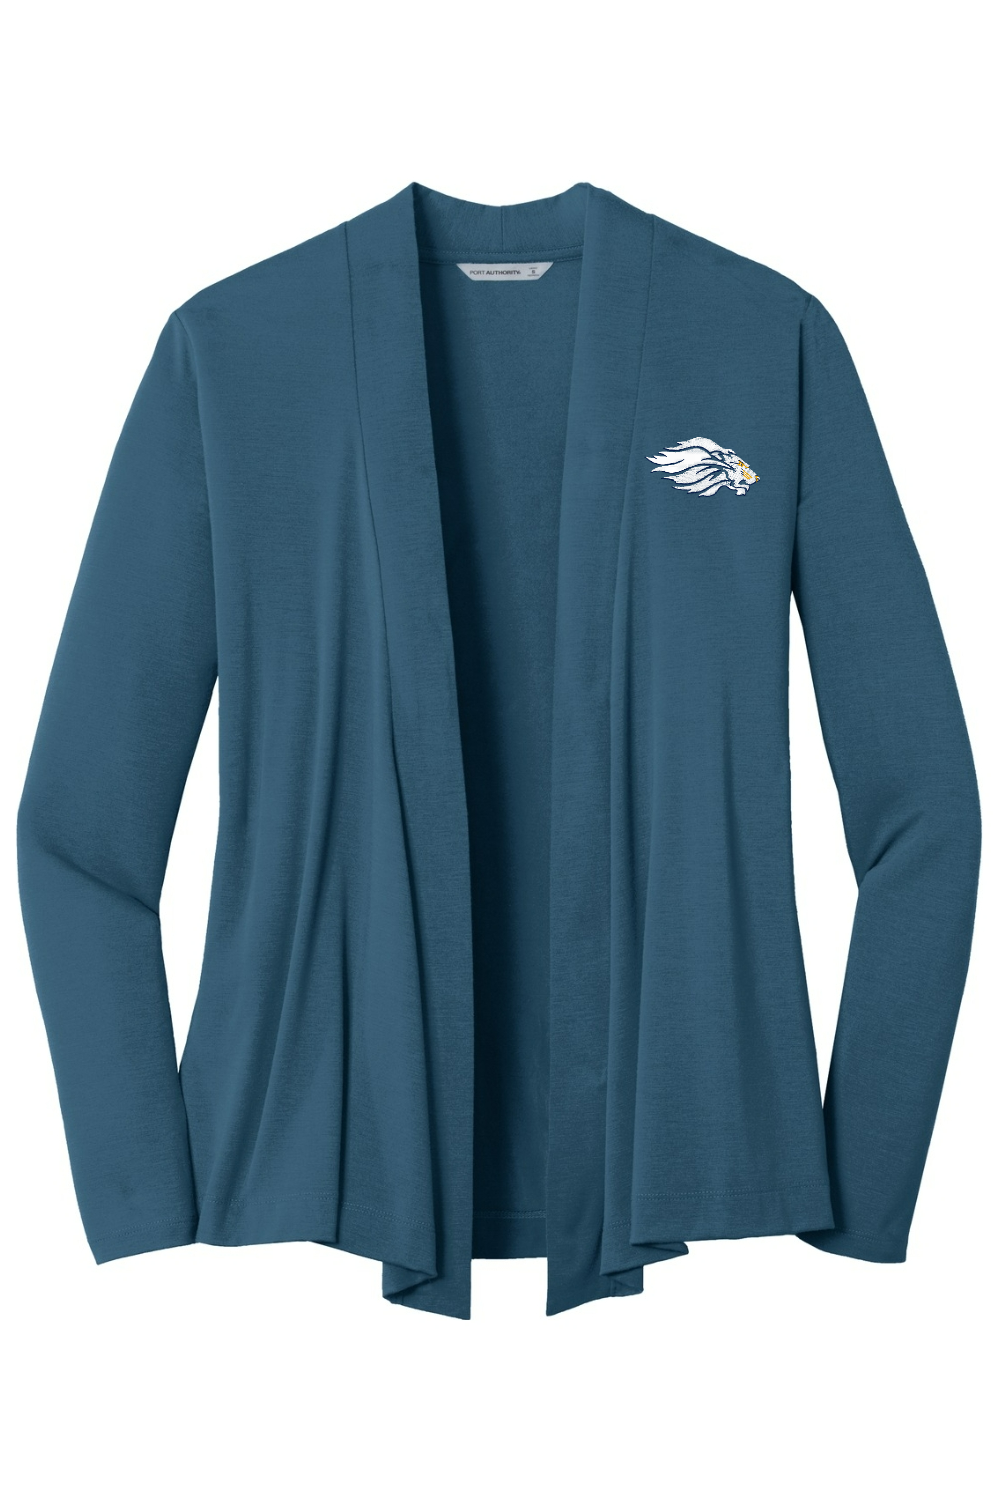 Lions Embroidered Port Authority Ladies Concept Open Cardigan